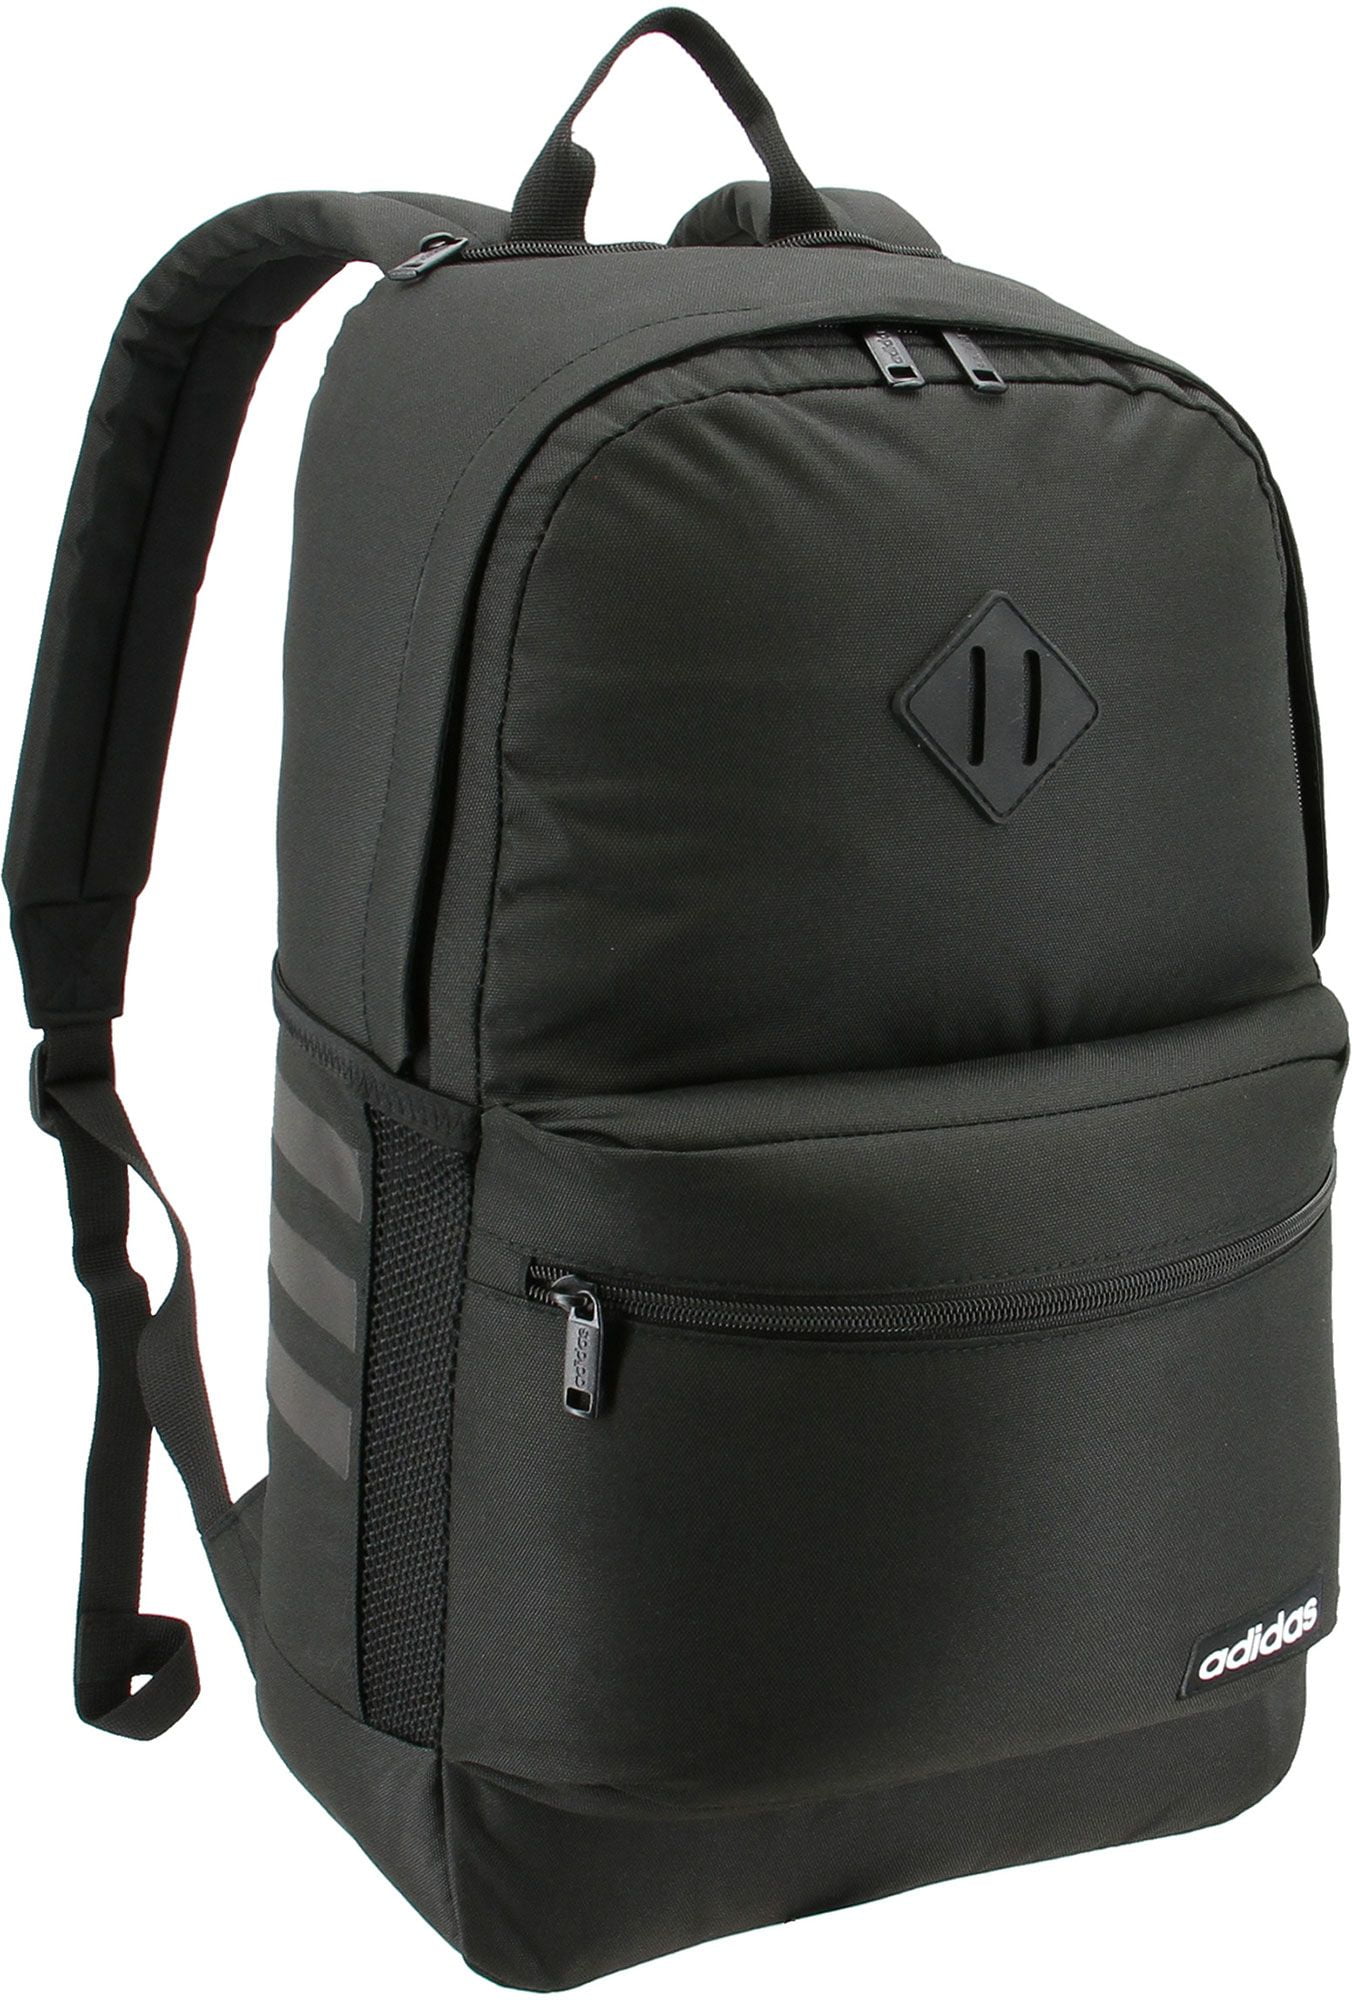 adidas classic 3s ii backpack review